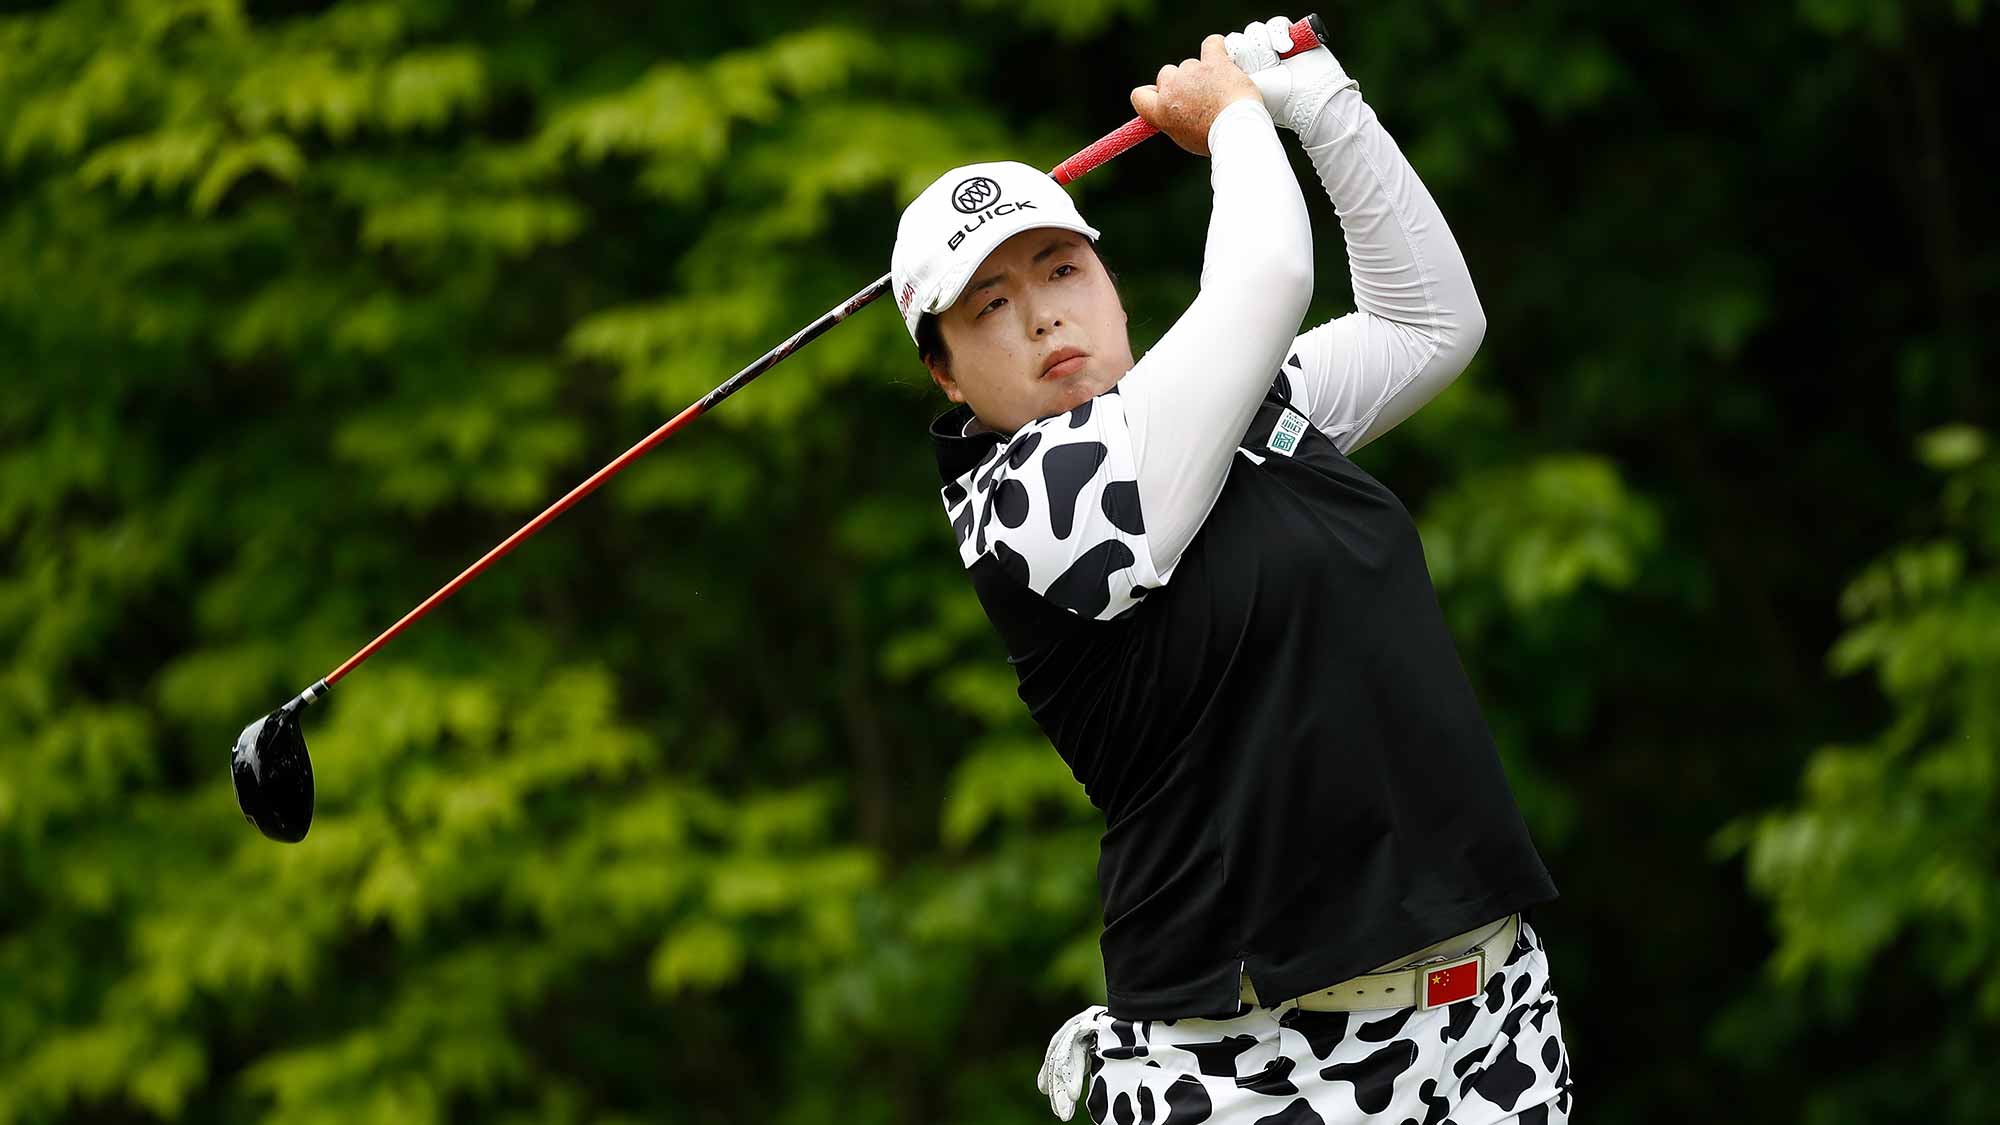 Shanshan Feng of China watches her drive on the fourth hole during the third round of the LPGA Volvik Championship on May 27, 2017 at Travis Pointe Country Club Ann Arbor, Michigan